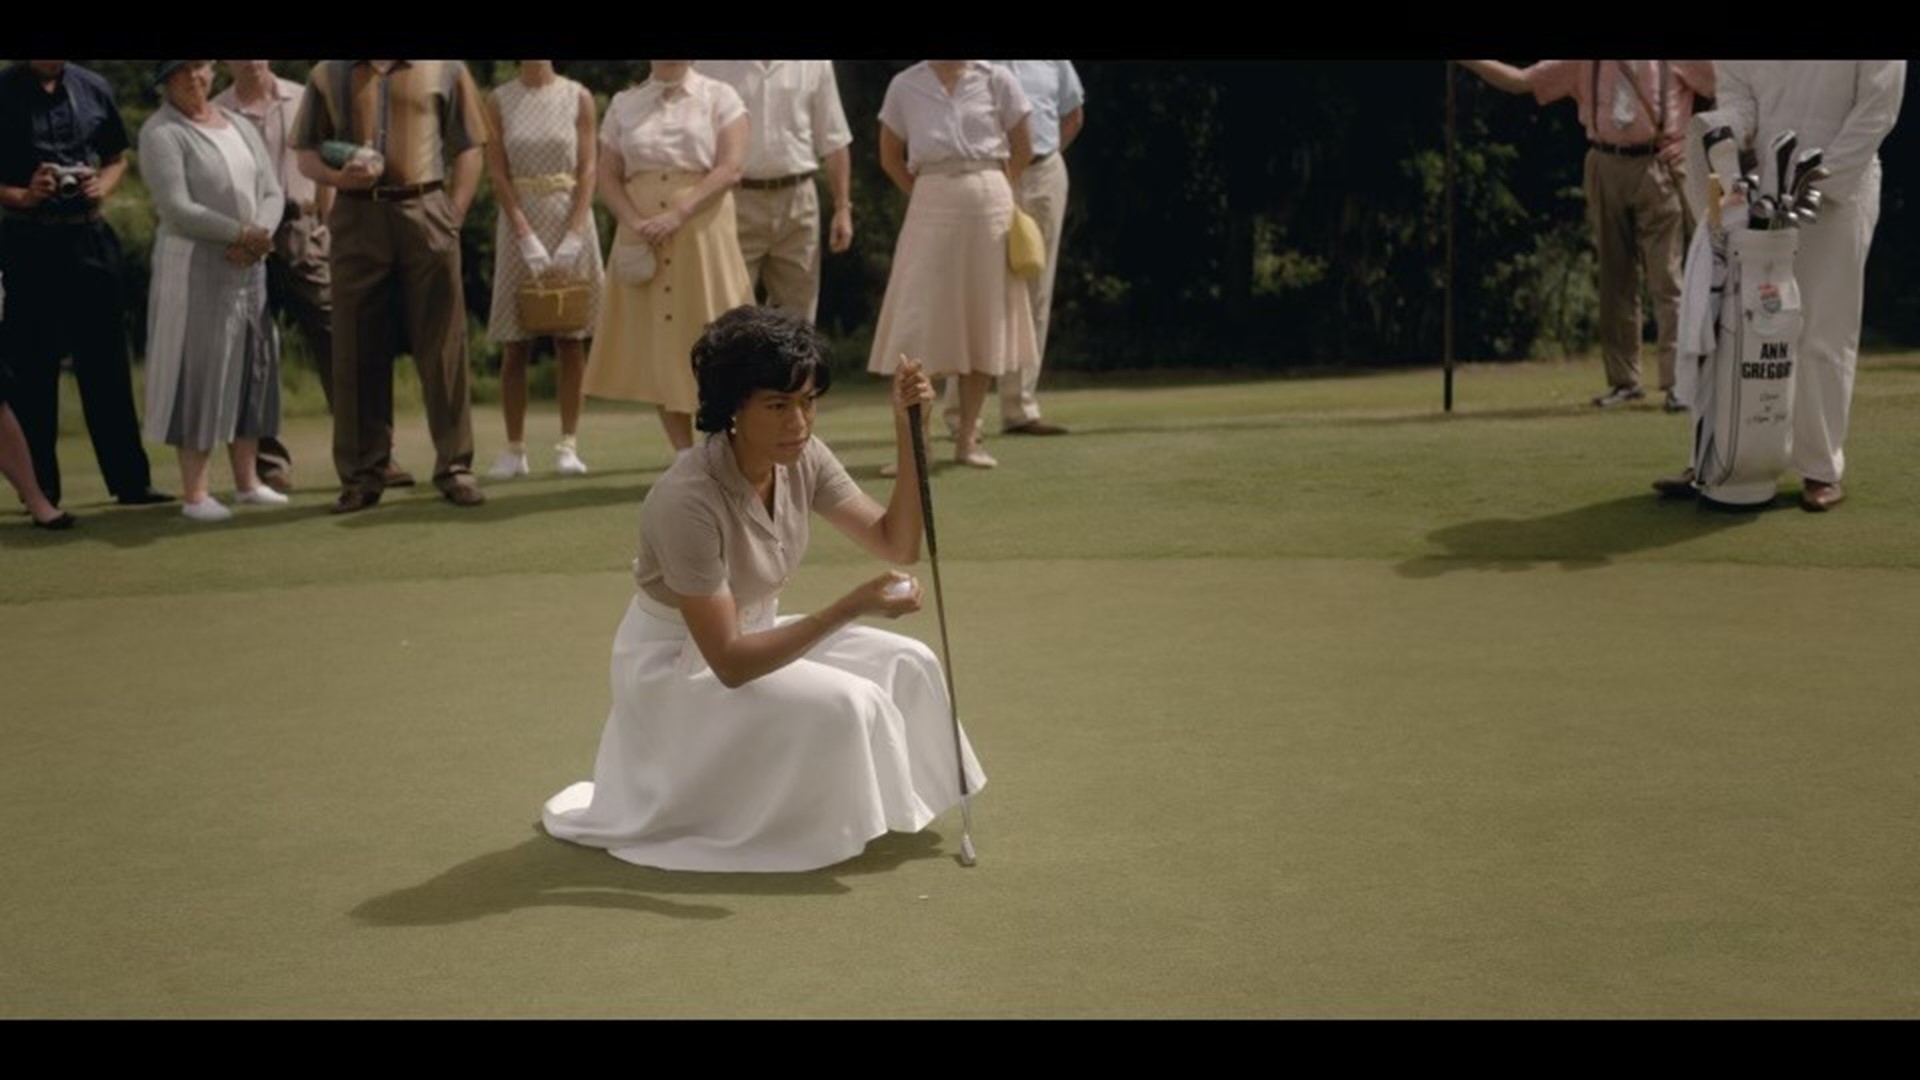 In "Playing Through," Andia Winslow portrays Ann Gregory, the first black woman to play in a USGA   championship. #k5evening